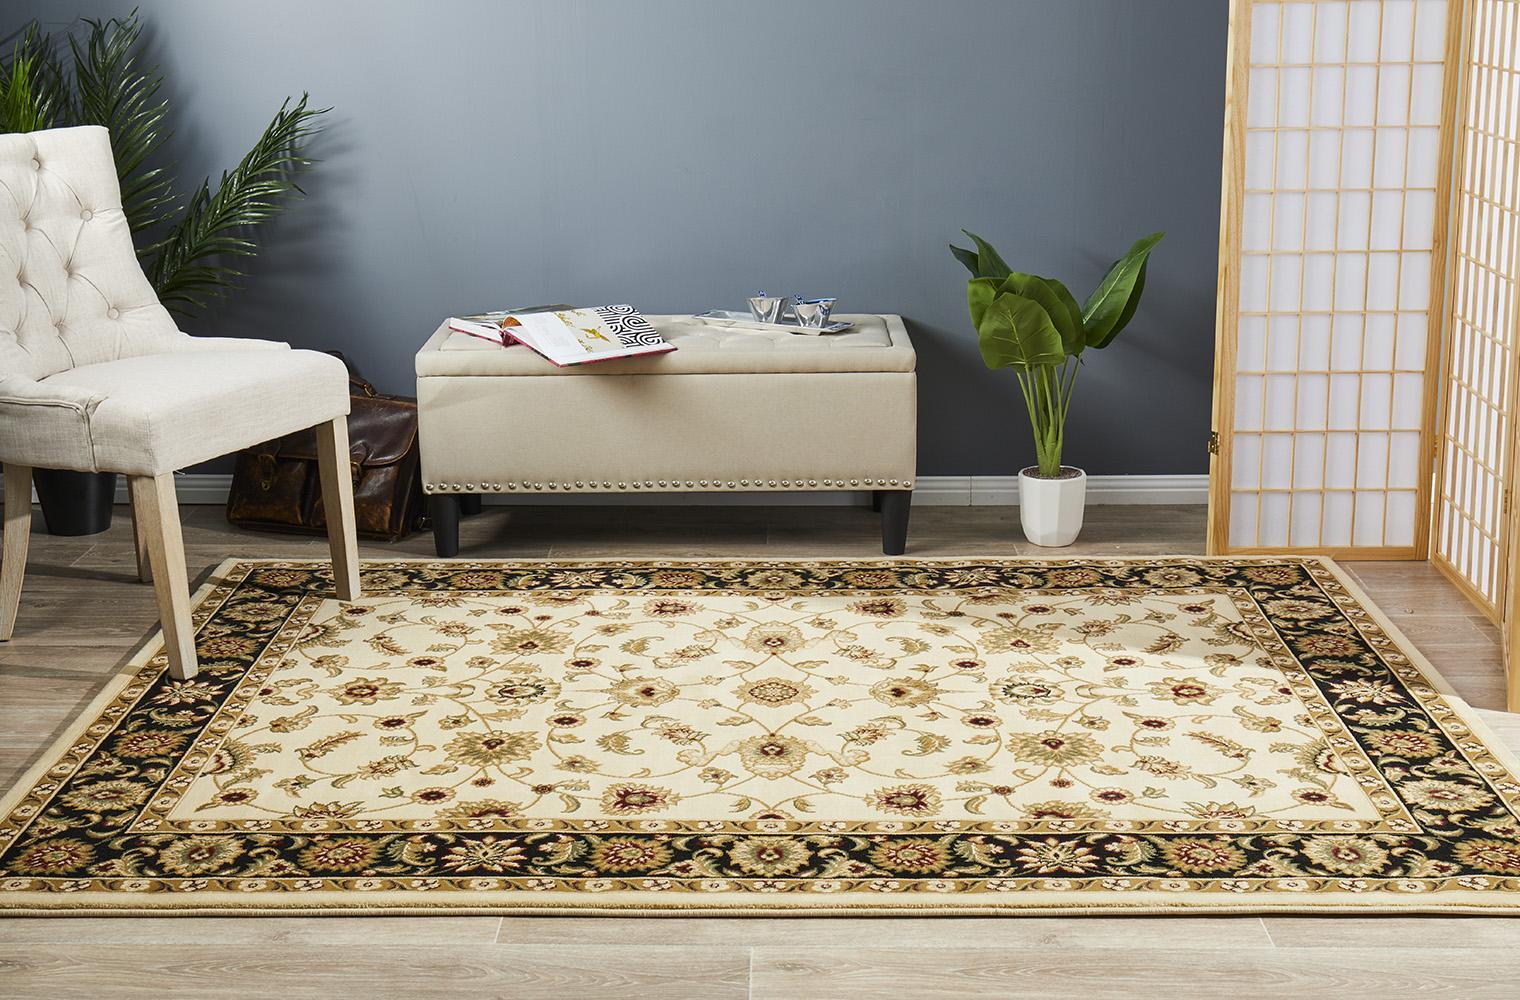 Rug Culture Classic Runner Ivory with Black Border 300x80cm